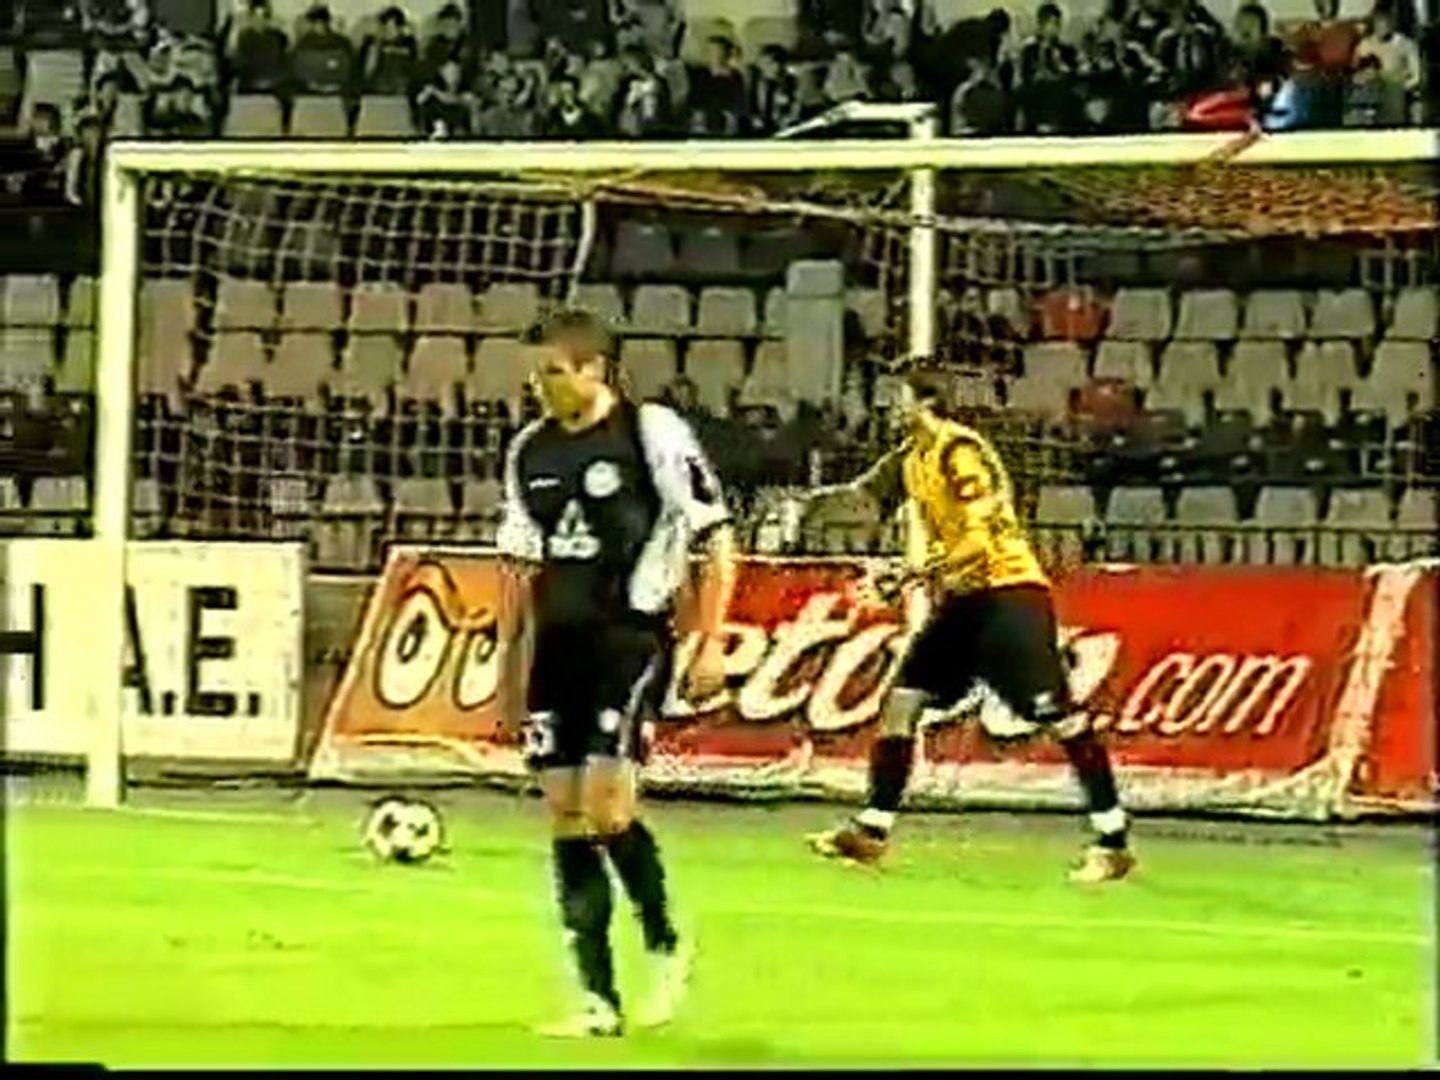 Donetsk-PAOK 2-2 [29.09.2005 - Highlights].mp4 - video Dailymotion